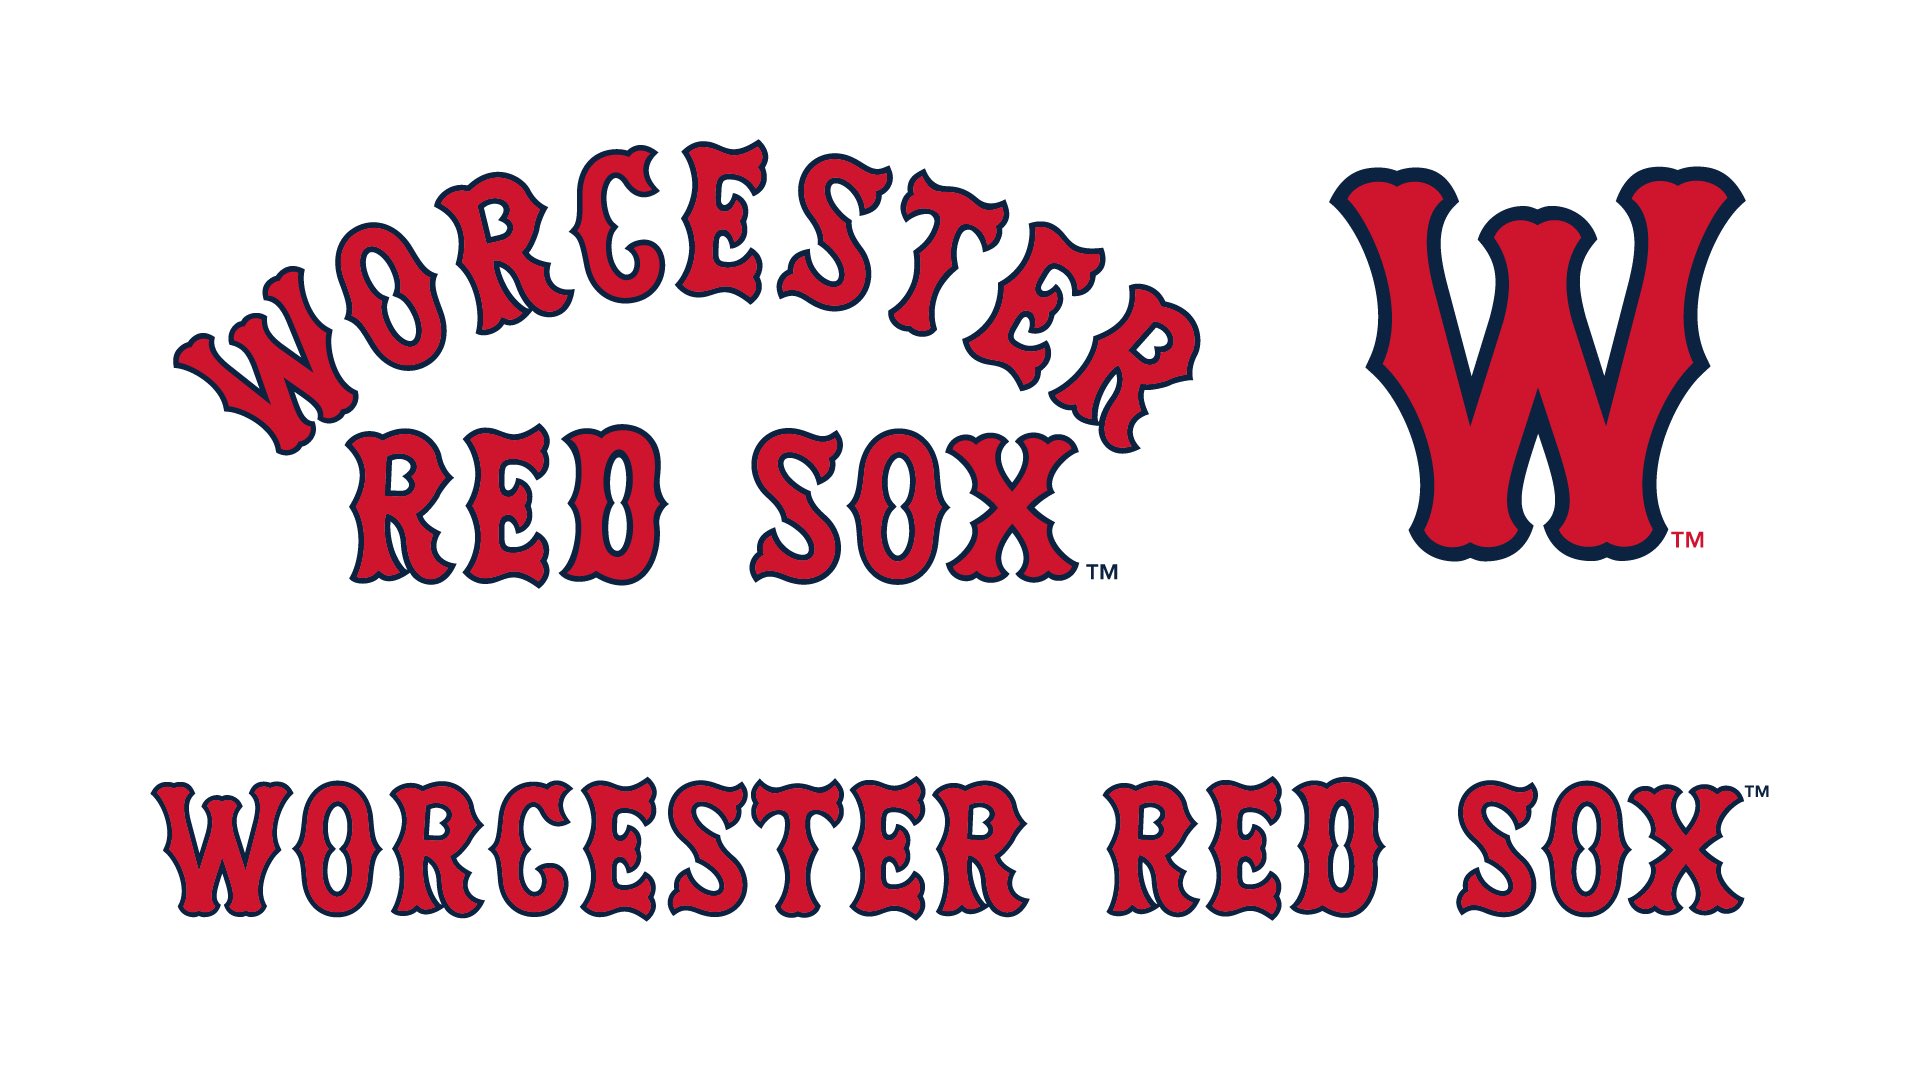 Smile! PawSox to become WooSox in Worcester – SportsLogos.Net News